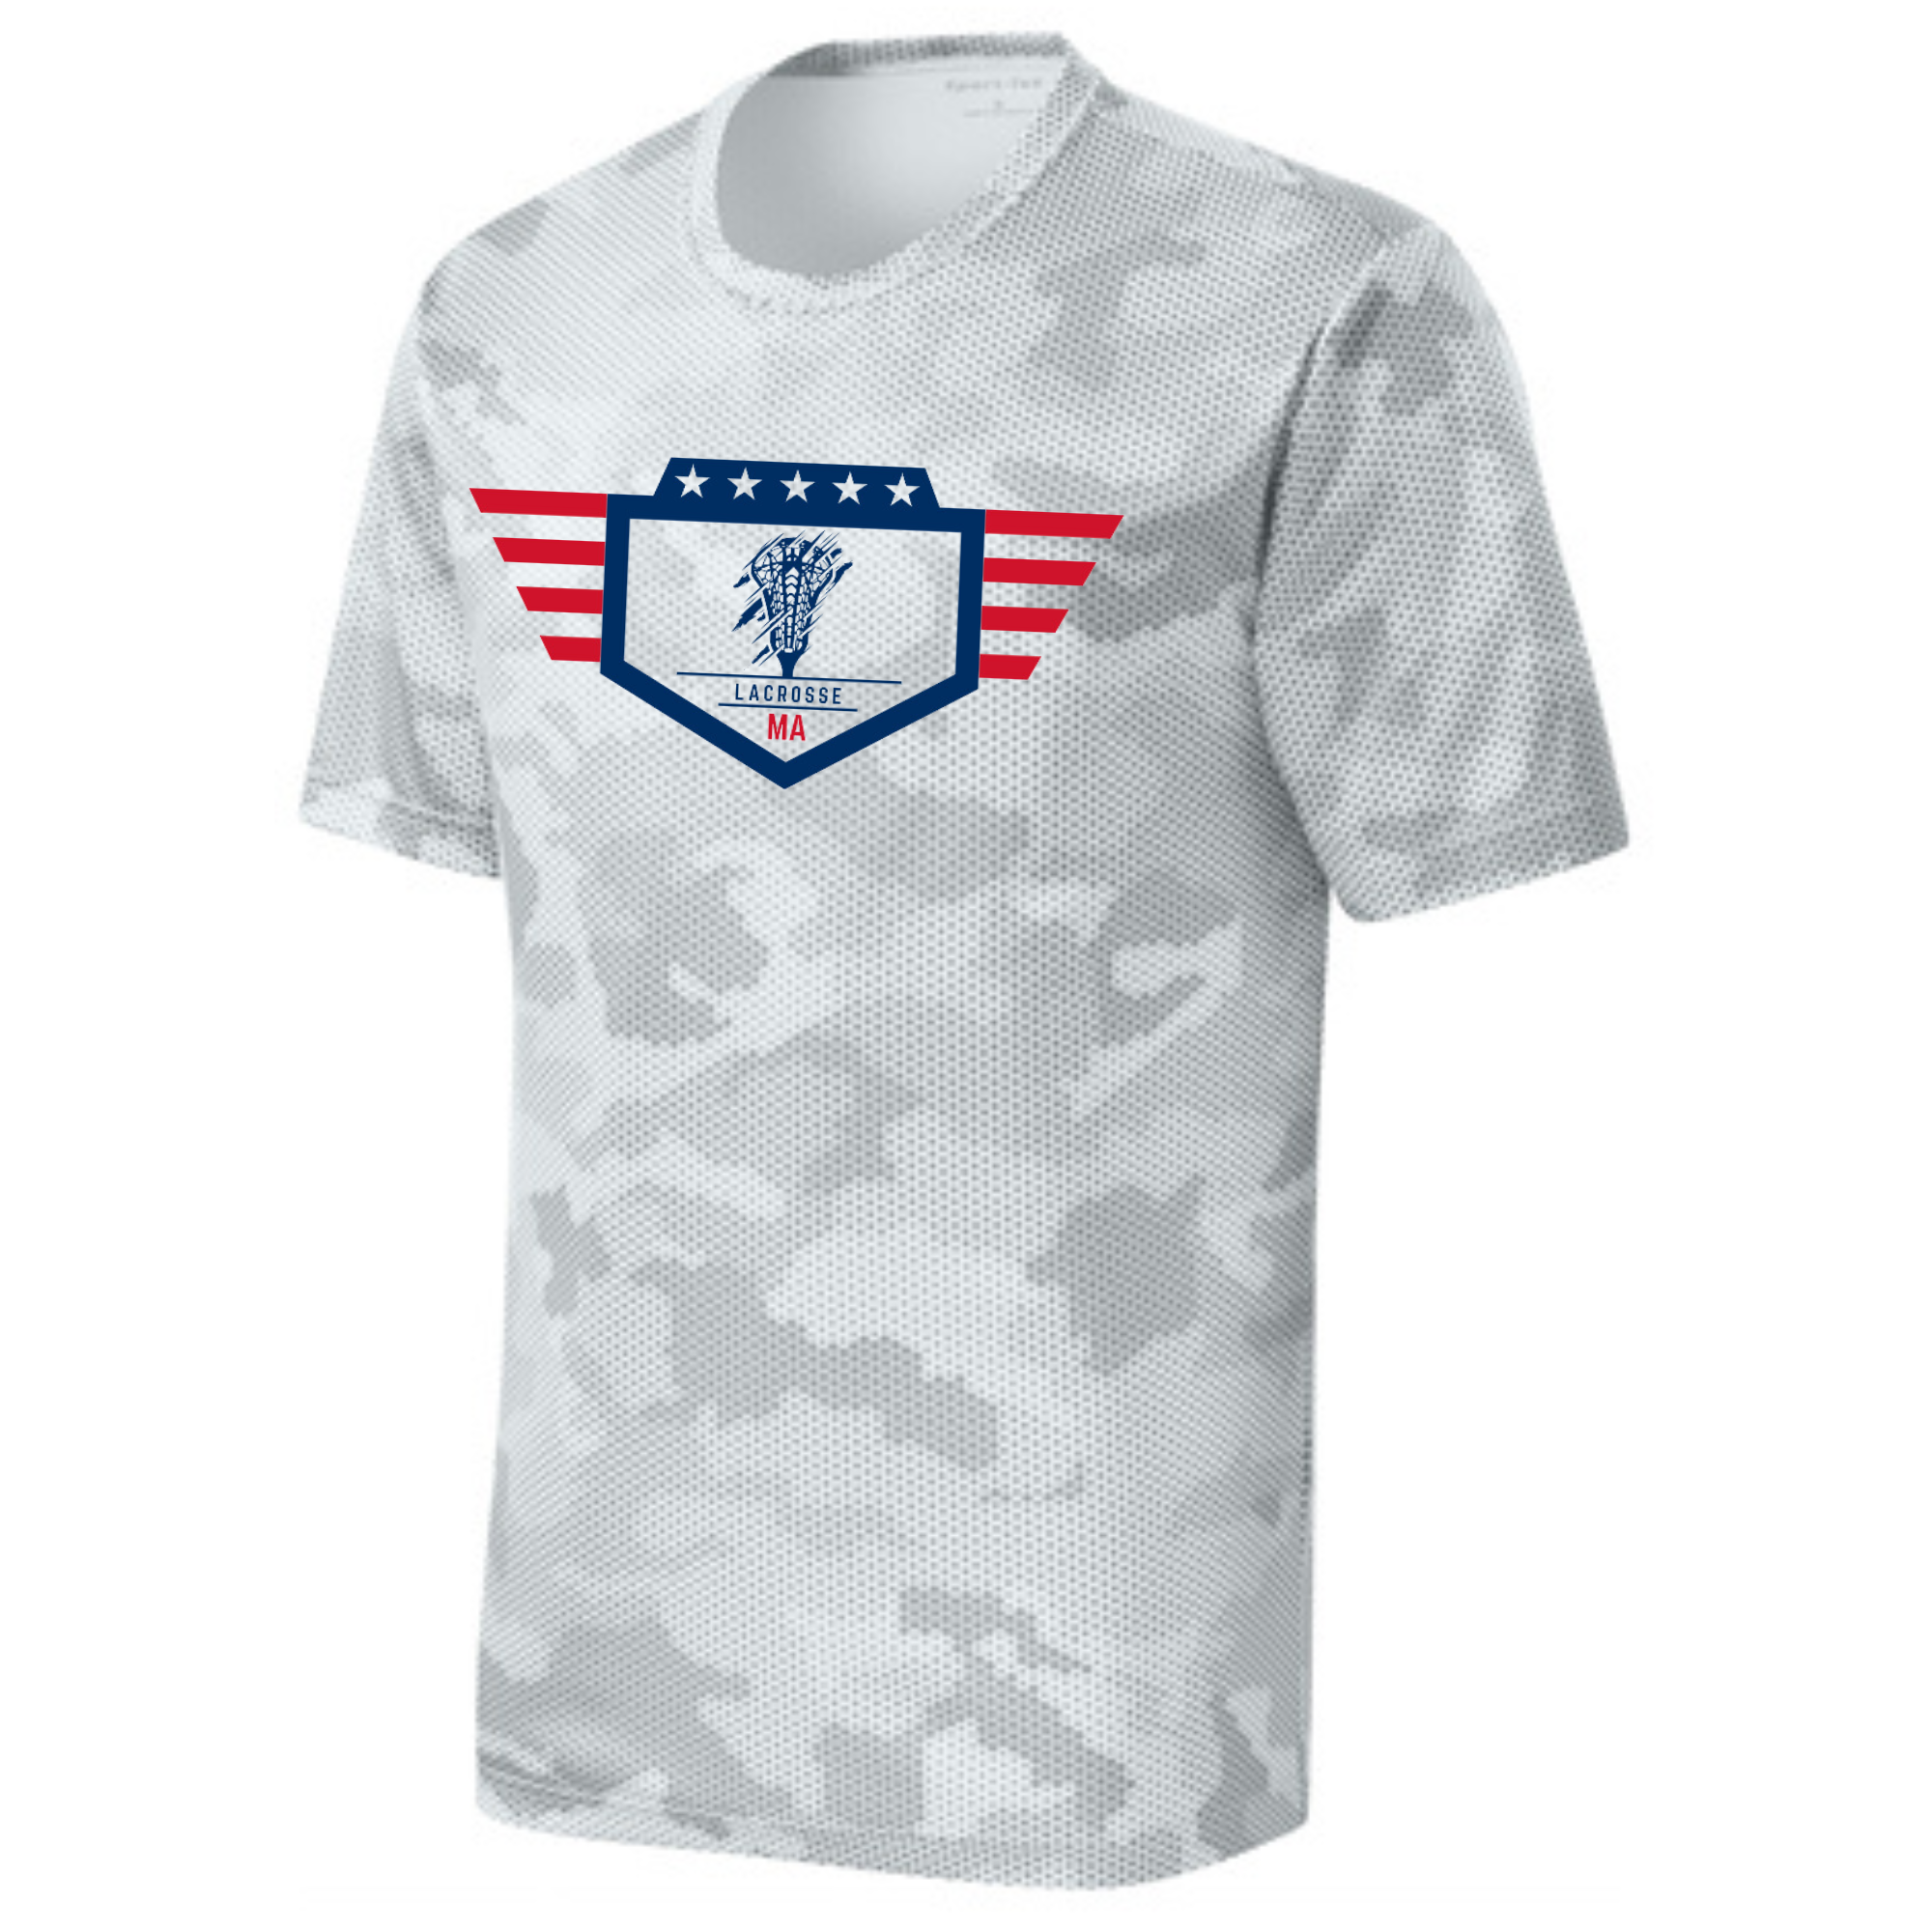 TUNEUP TOURNAMENT MA LACROSSE CAMOHEX ADULT TEE - WHITE